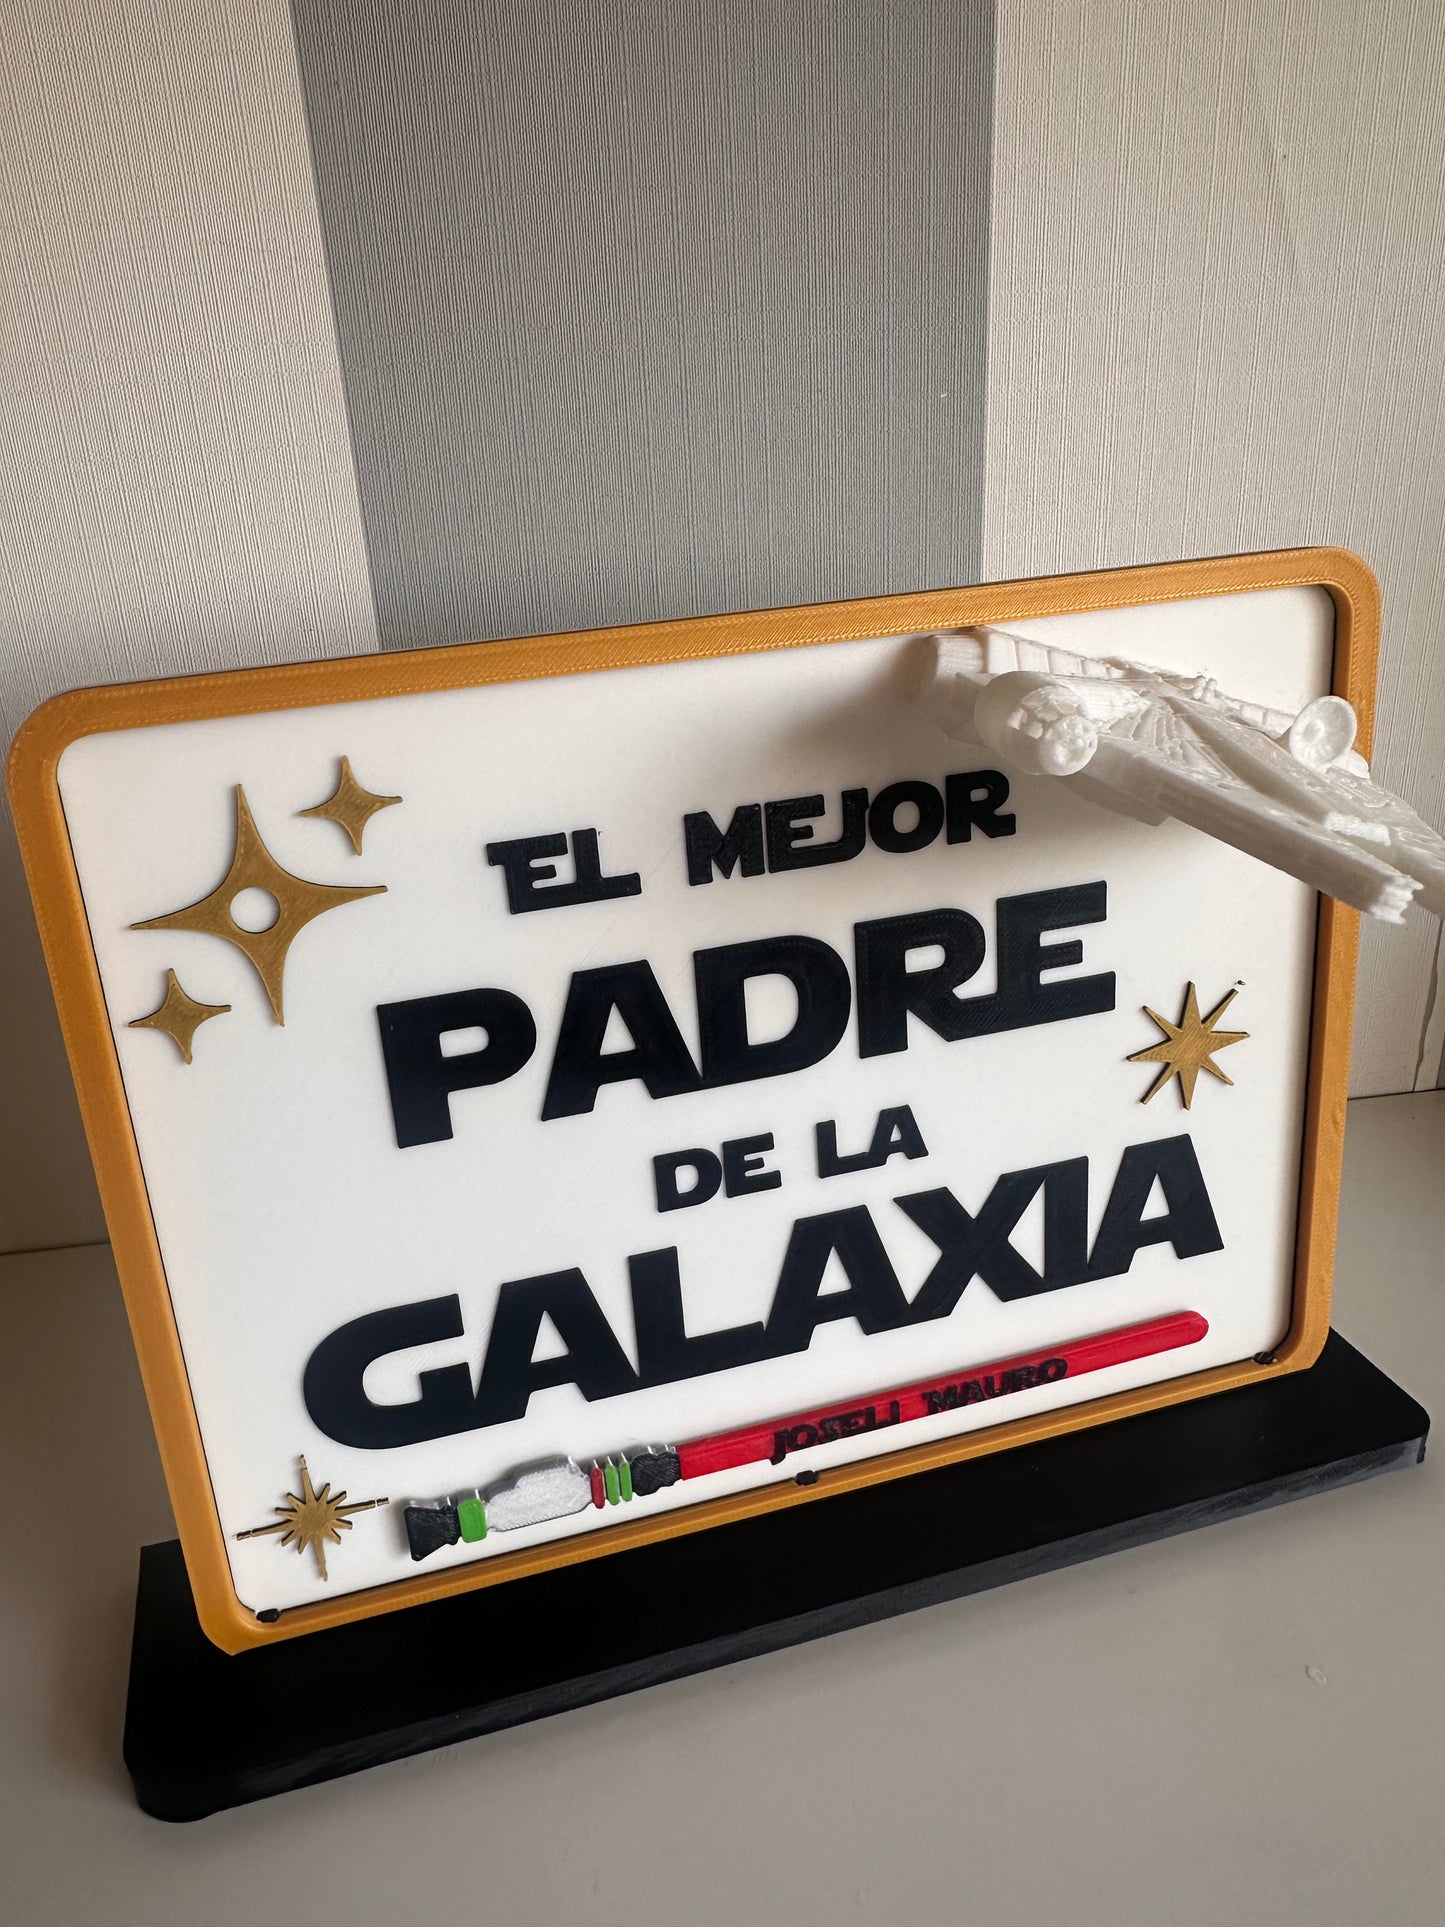 Star Wars Father's Day plate